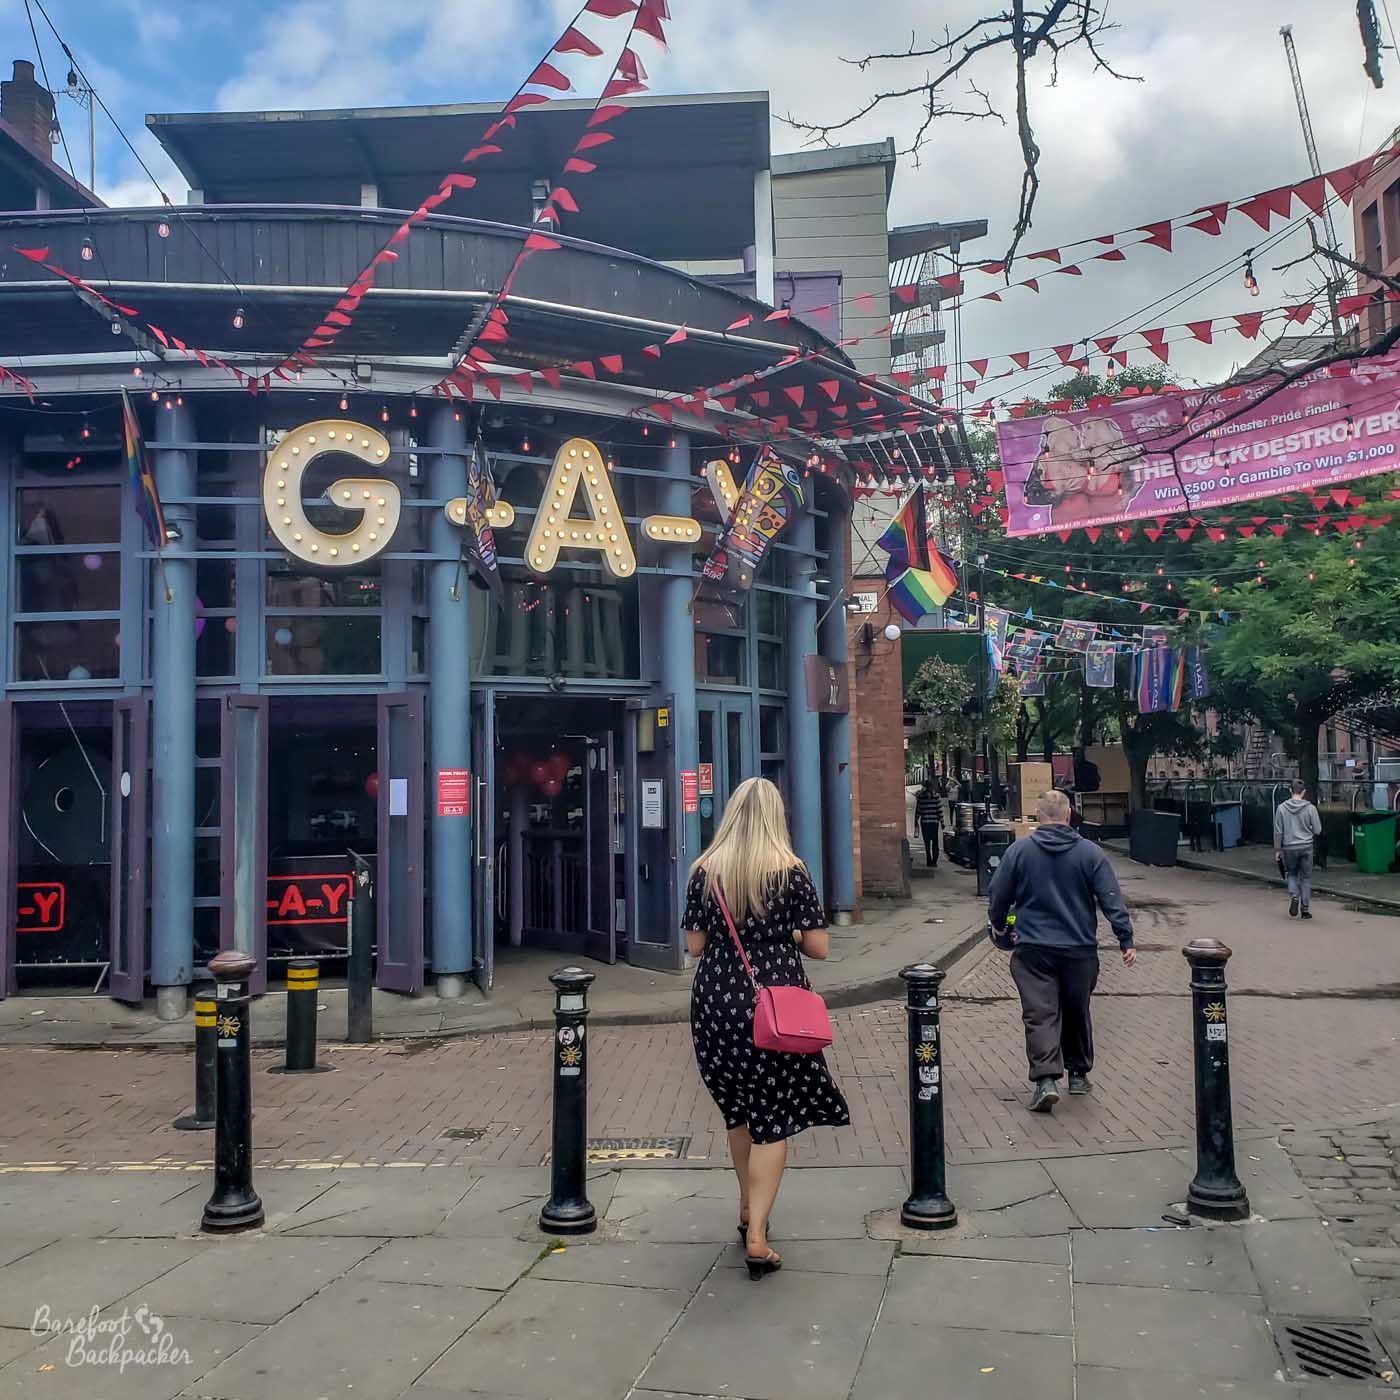 Building with a curved vista with columns in front.. It is a bar called G-A-Y, which are in big yellow LED letters on the front of the building. It is at a junction of pedestrianised roads – the road  to the right of the building is bedecked in bunting of rainbow colours. It's Pride Week.